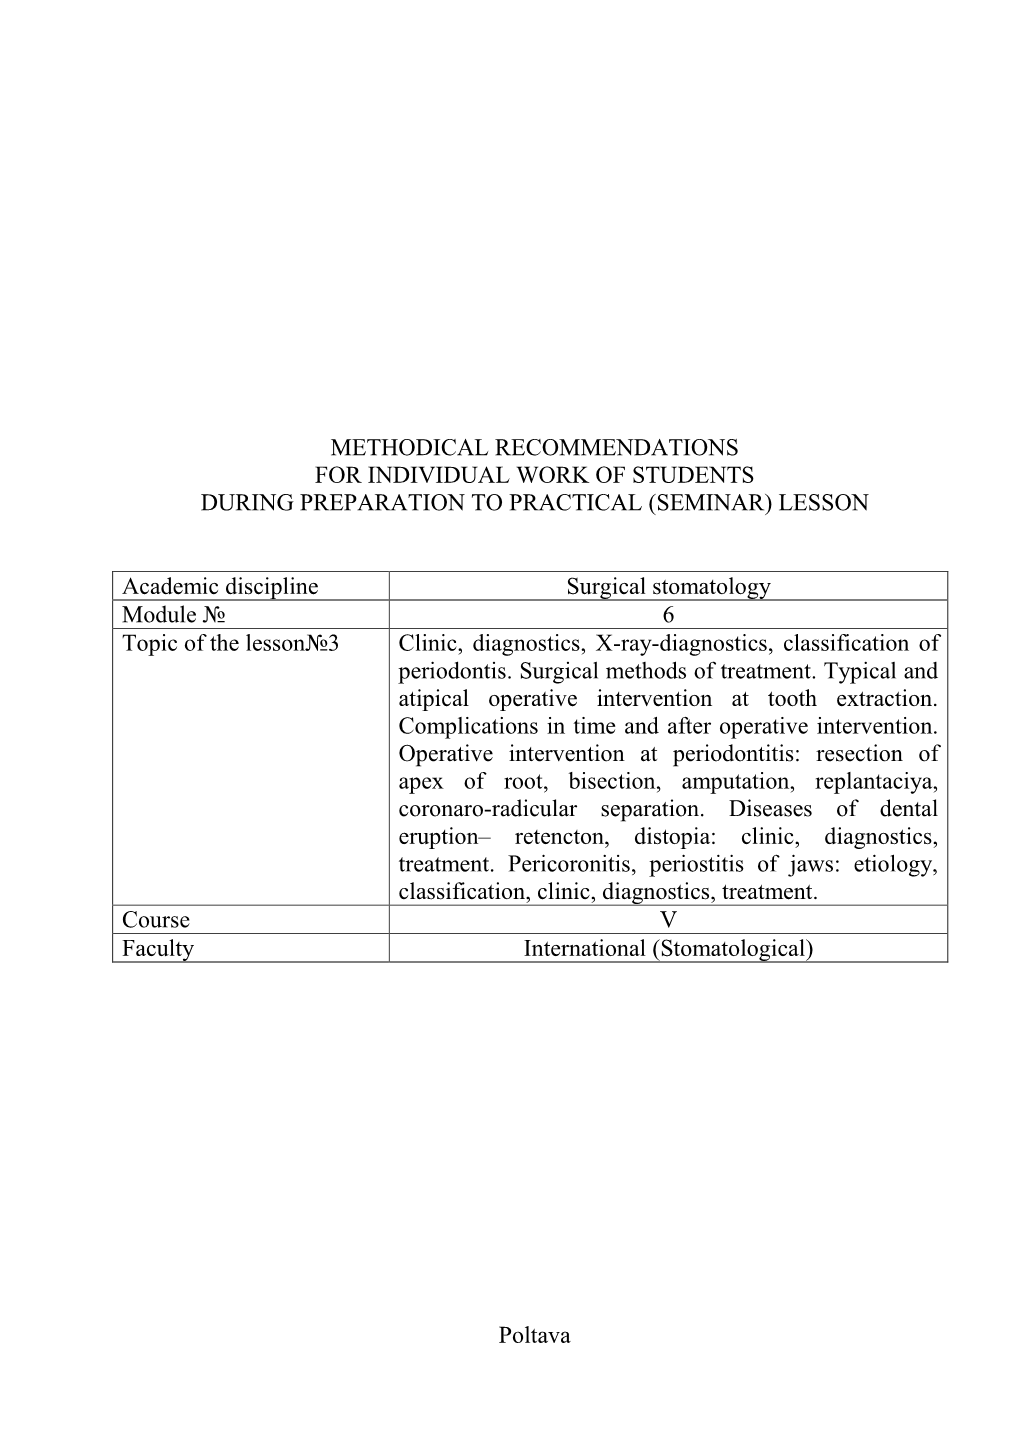 METHODICAL RECOMMENDATIONS for INDIVIDUAL WORK of STUDENTS DURING PREPARATION to PRACTICAL (SEMINAR) LESSON Academic Discipline